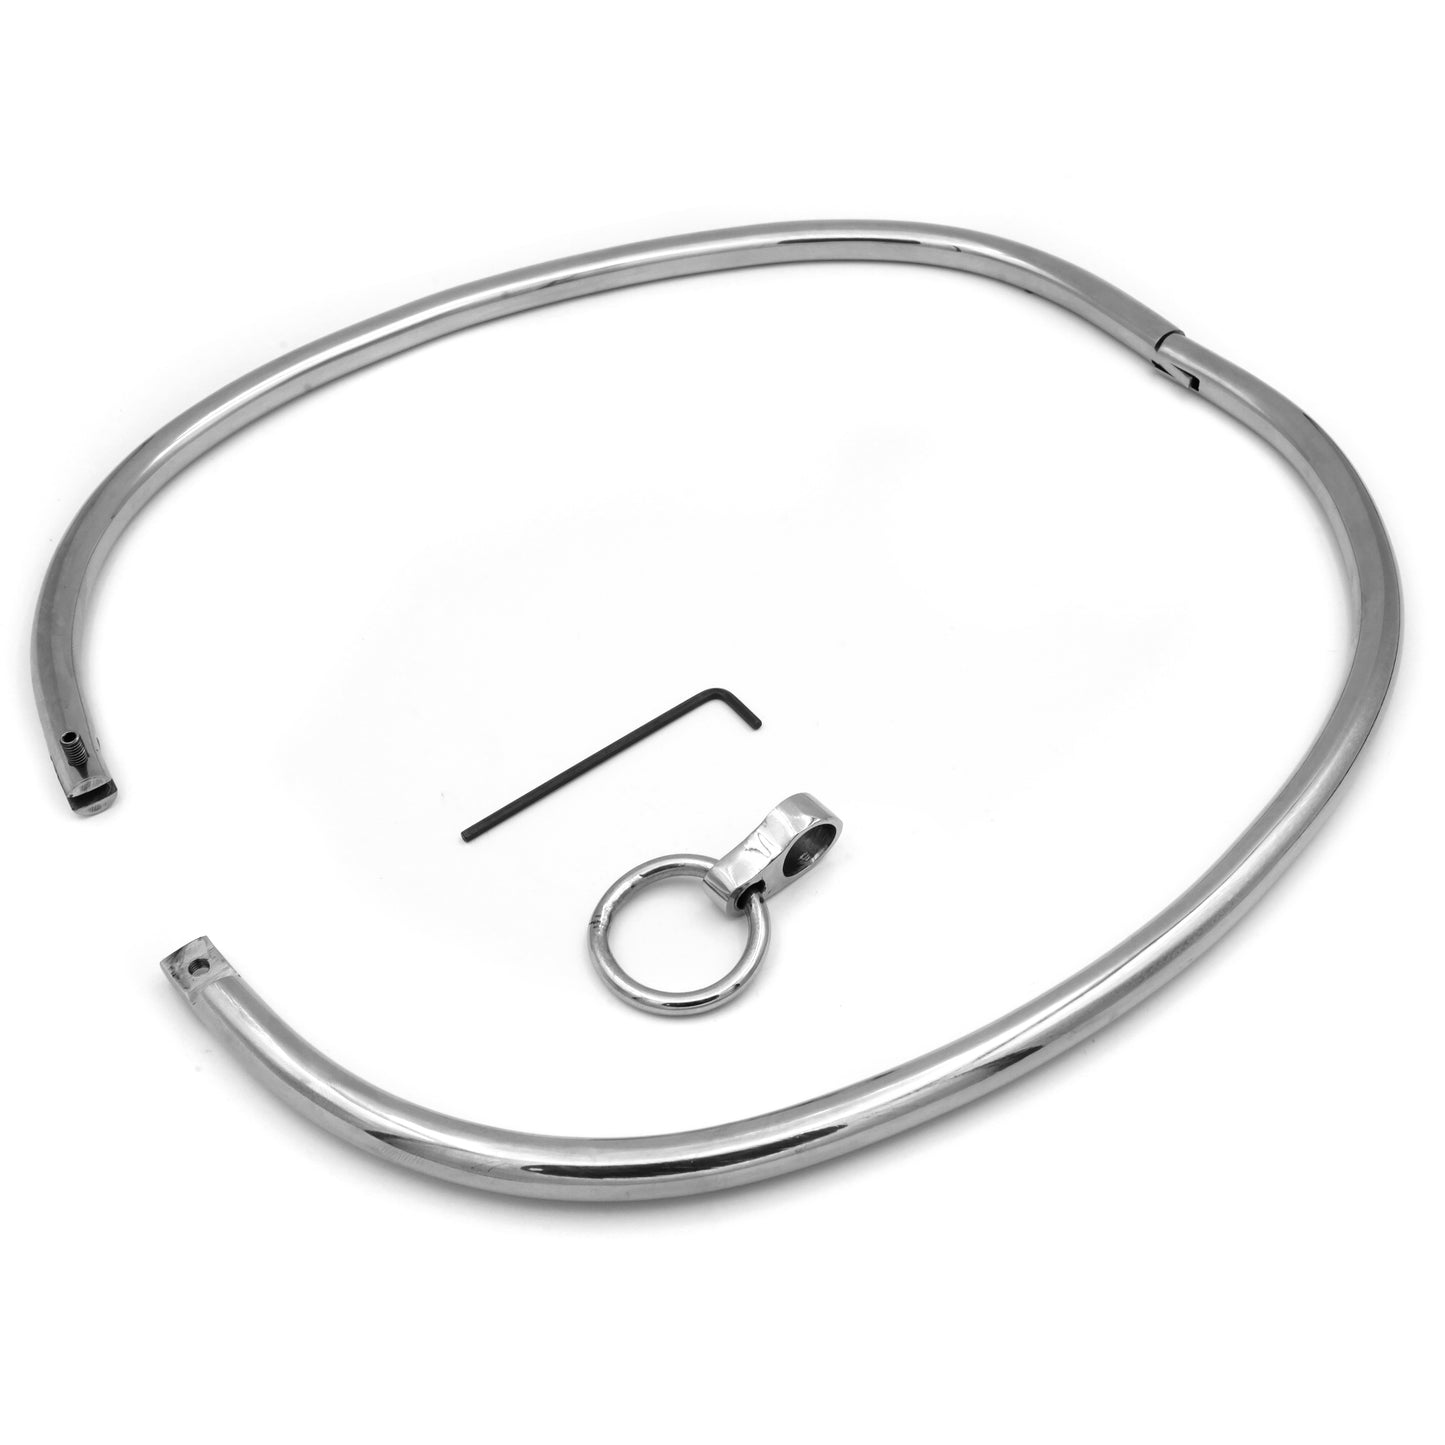 Stainless steel lockable belt, waist restraint, with O-ring